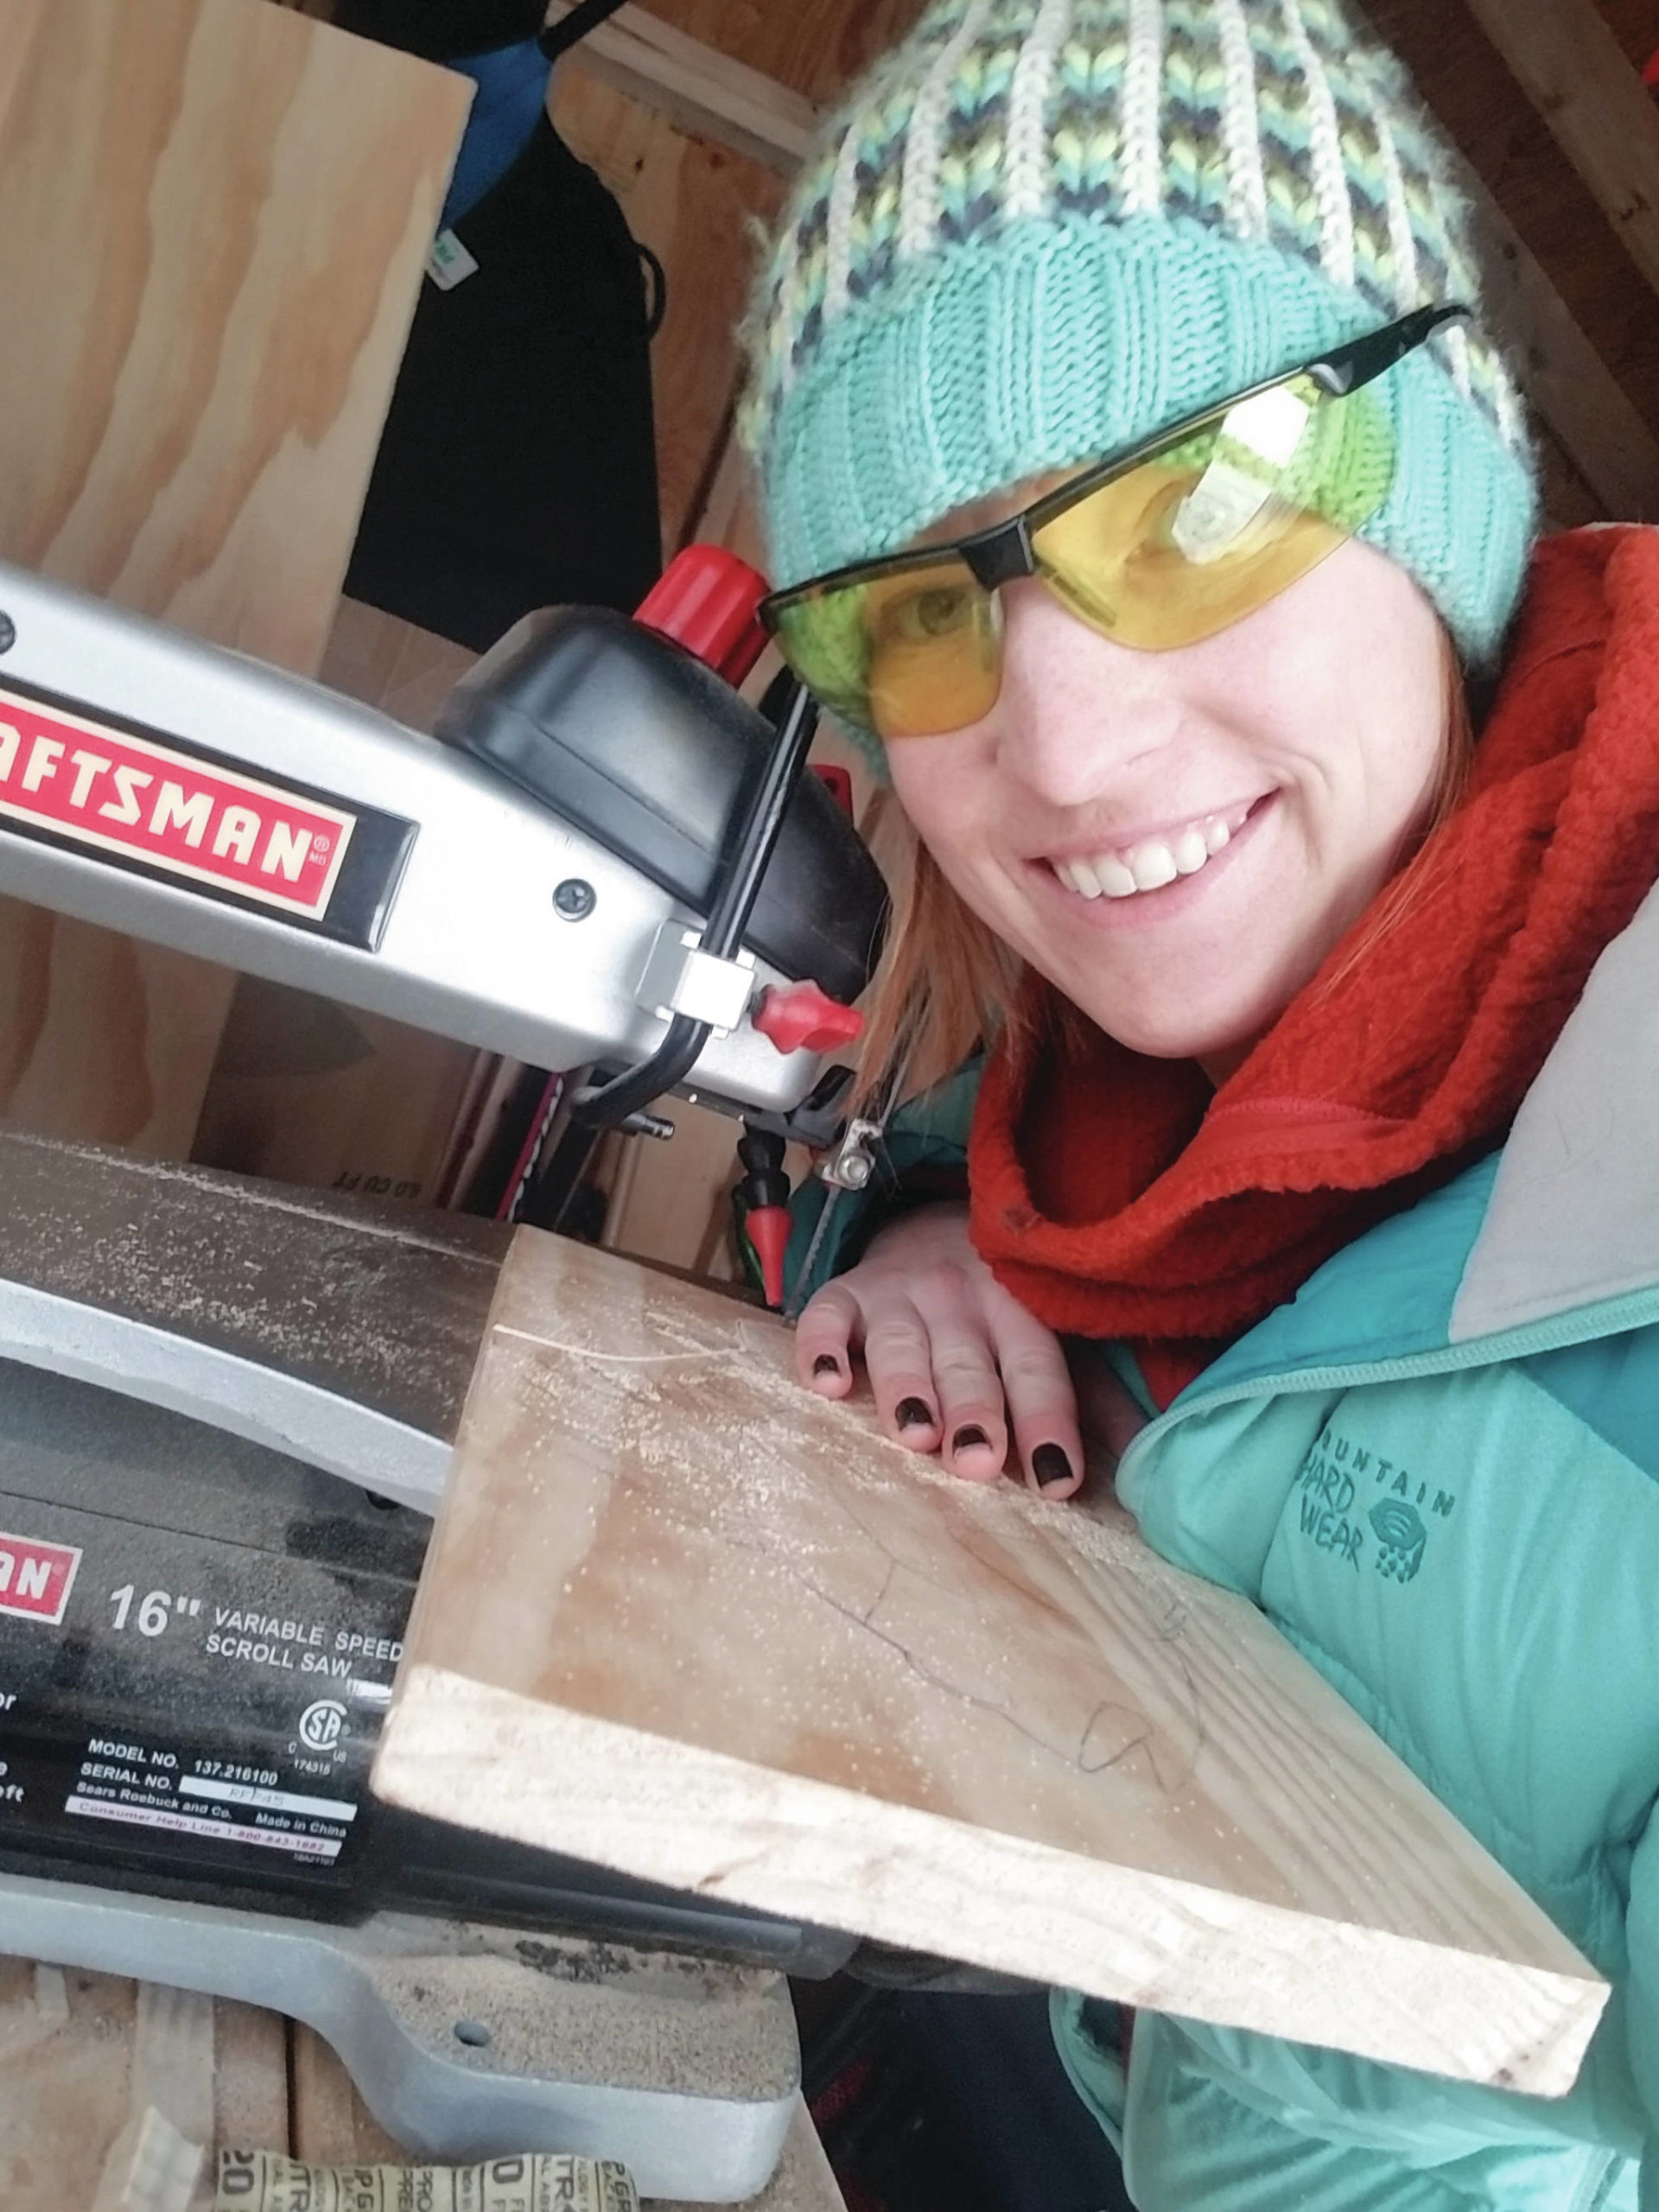 Kim Schuster poses with her scroll saw in a photo taken in November 2019 at her Homer, Alaska, workshop. (Photo courtesy Kim Schuster)